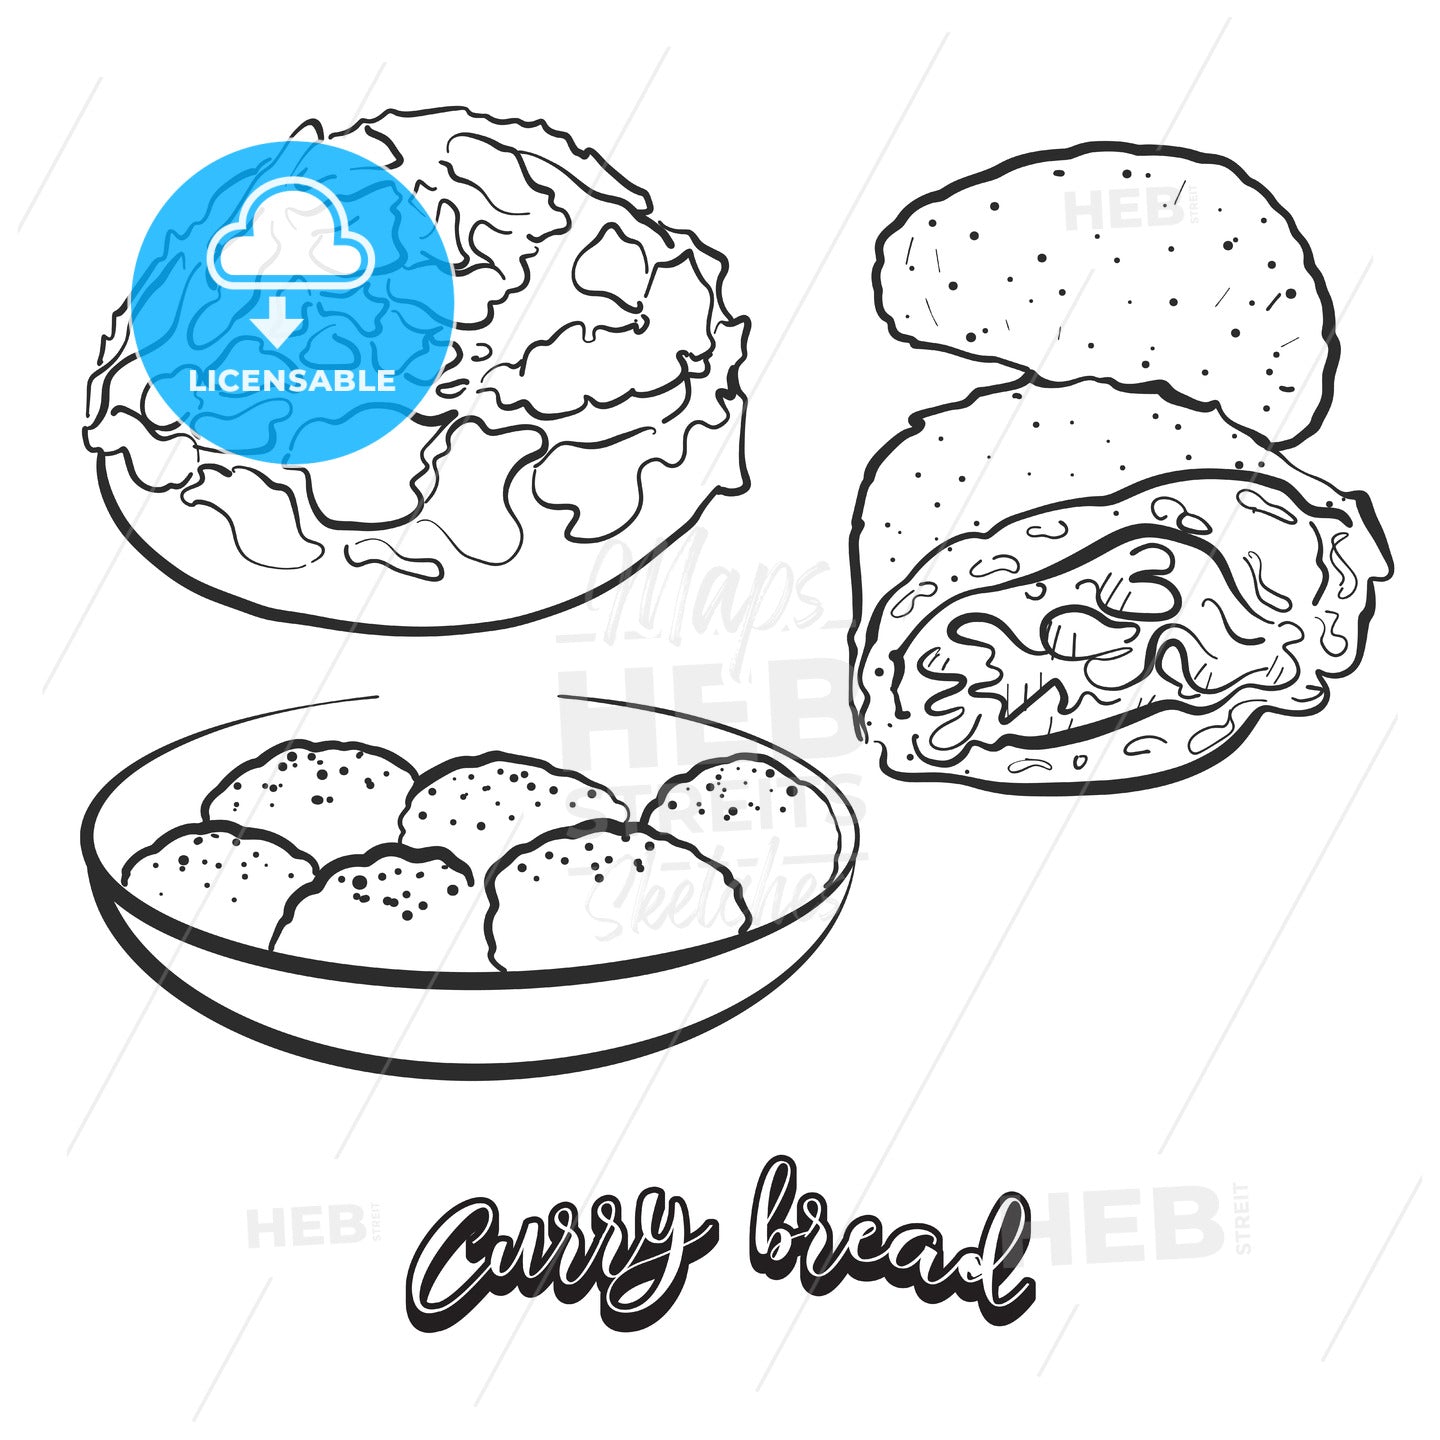 Hand drawn sketch of Curry bread bread – instant download